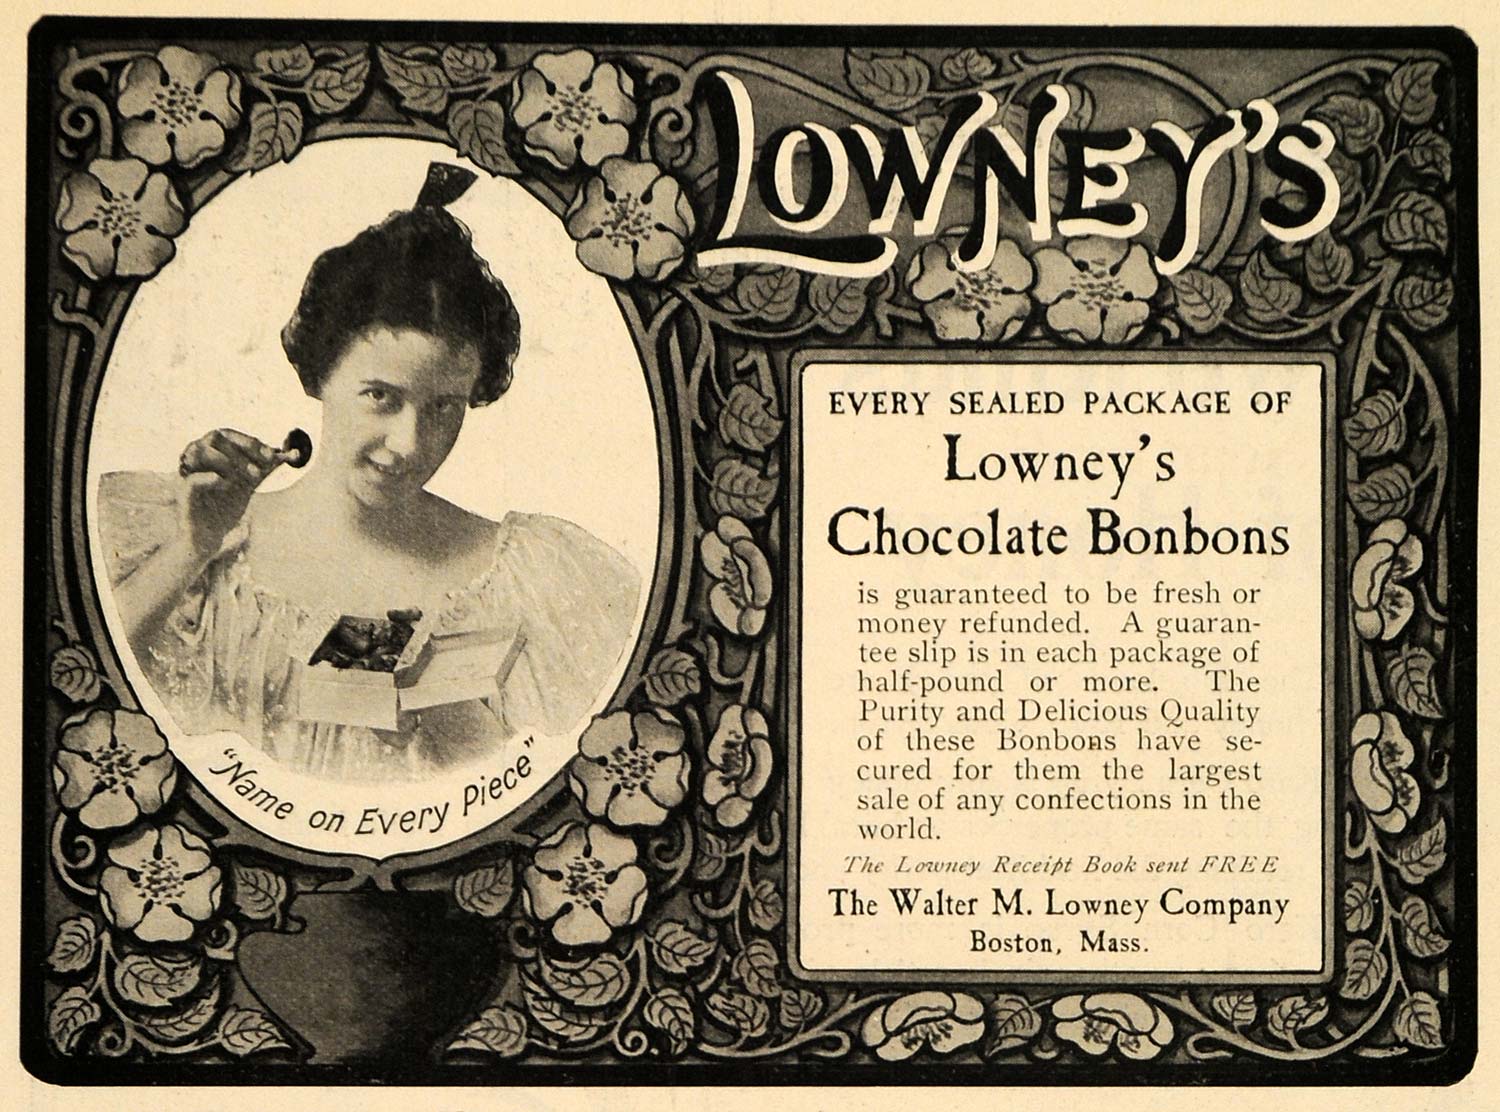 1904 Ad Walter M Lowney Co Chocolate Bonbons Candy - ORIGINAL ADVERTISING TOM2